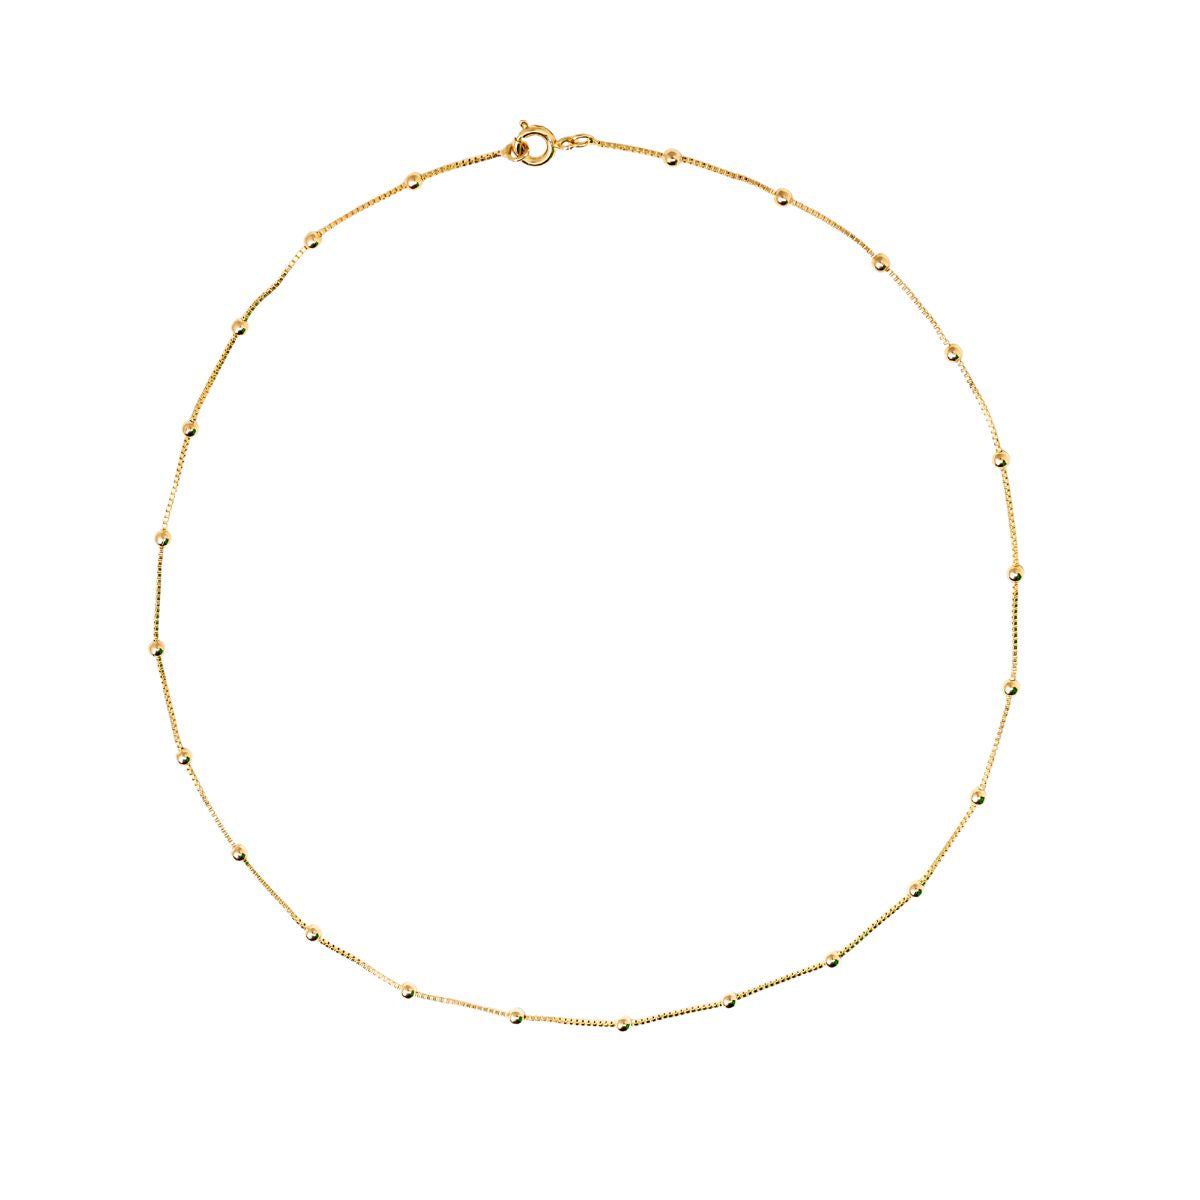 Dotted Chain - Necklace - 18k Gold Plated